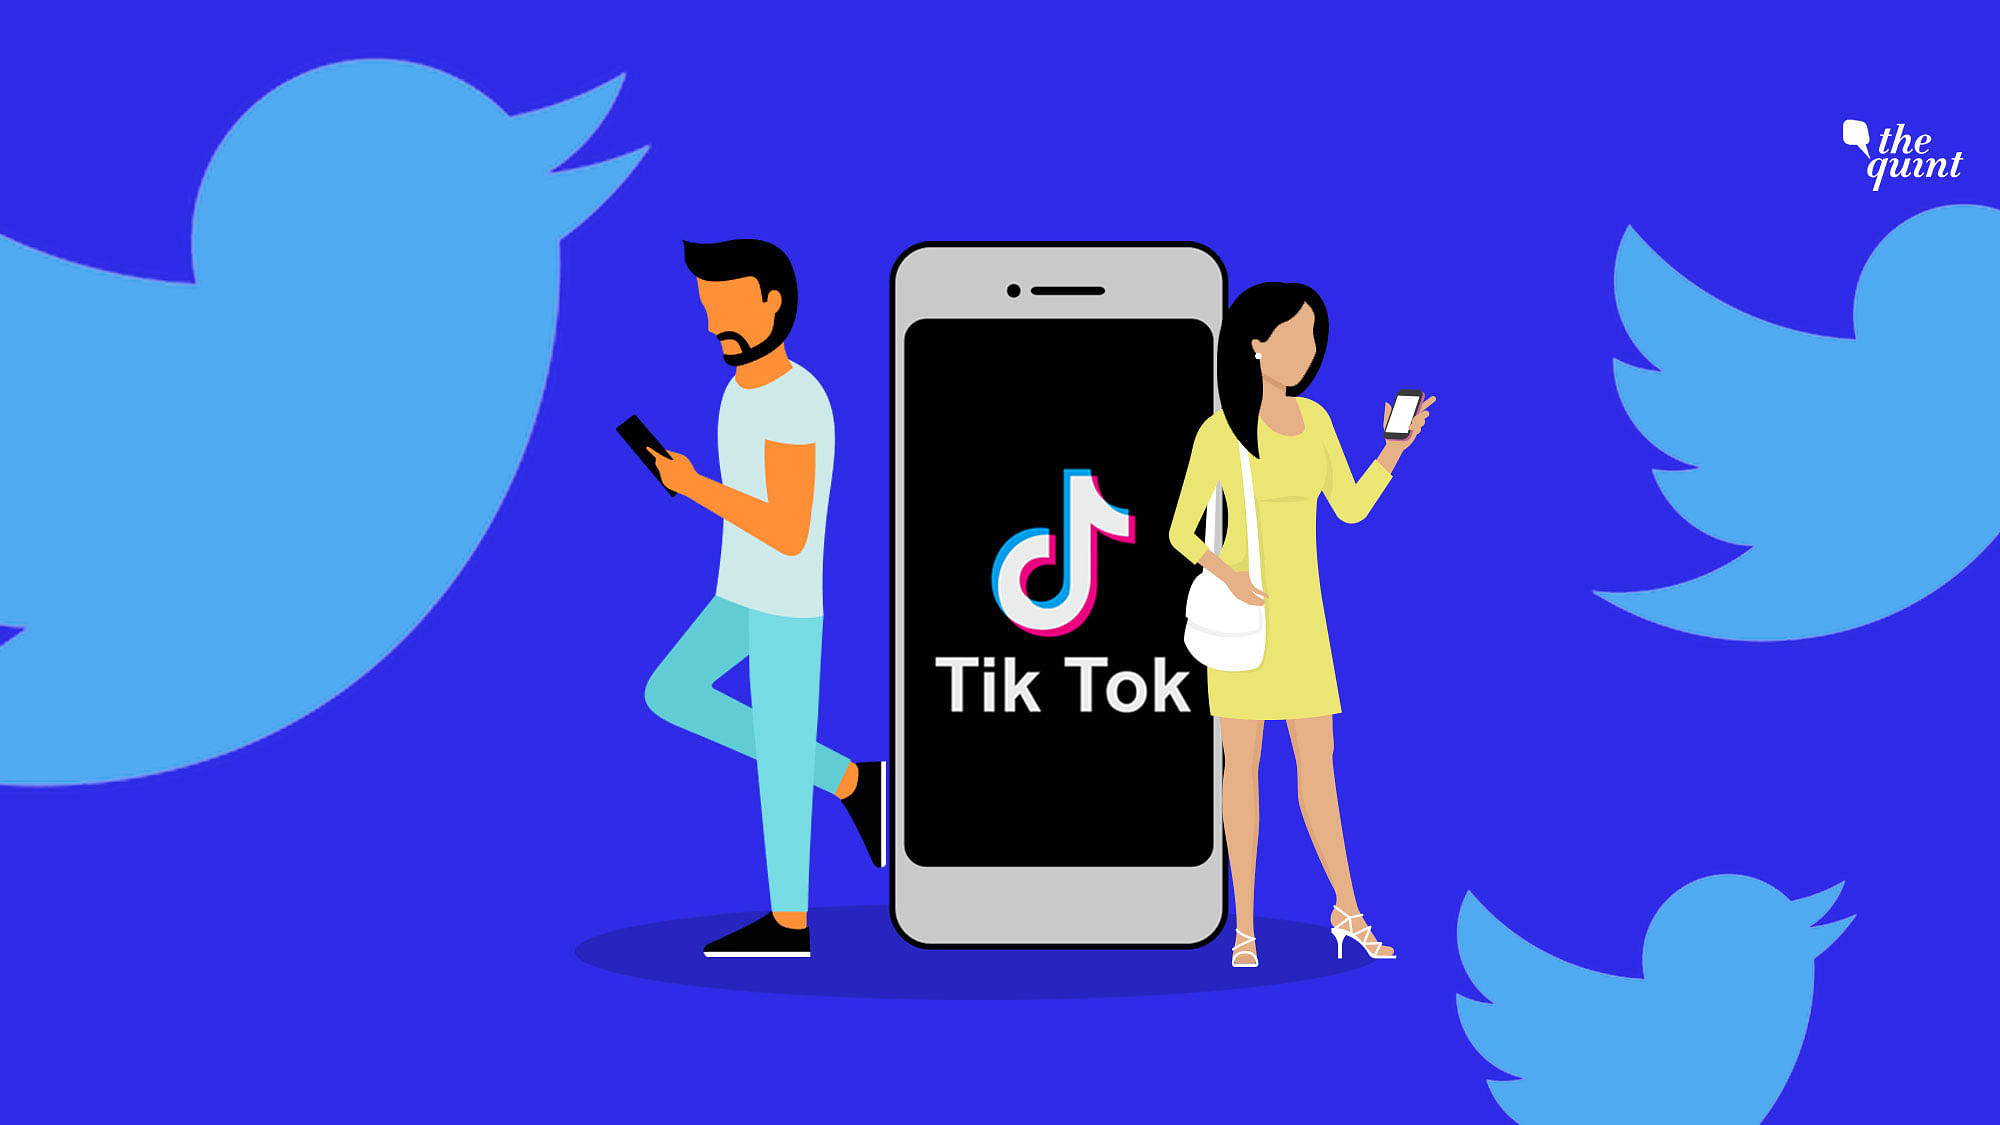 TikTok puts fame within reach for everyone. On the app, India’s got talent is a motto to live &amp; post videos by.&nbsp;